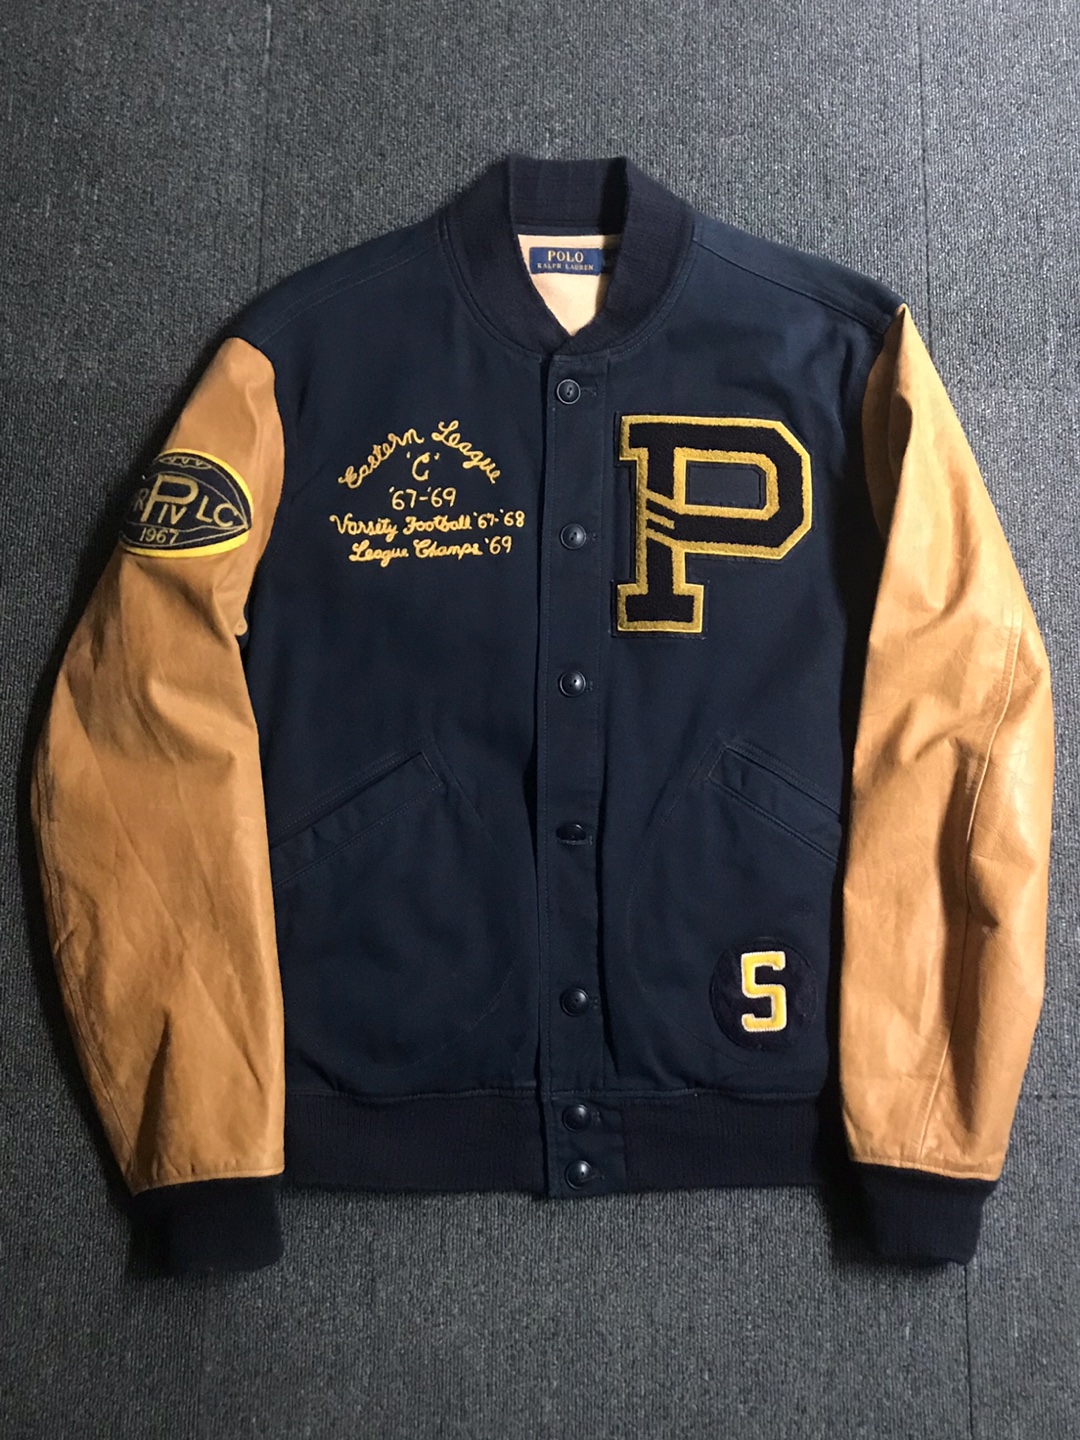 Polo RL cotton/leather slv patches embroidered varsity